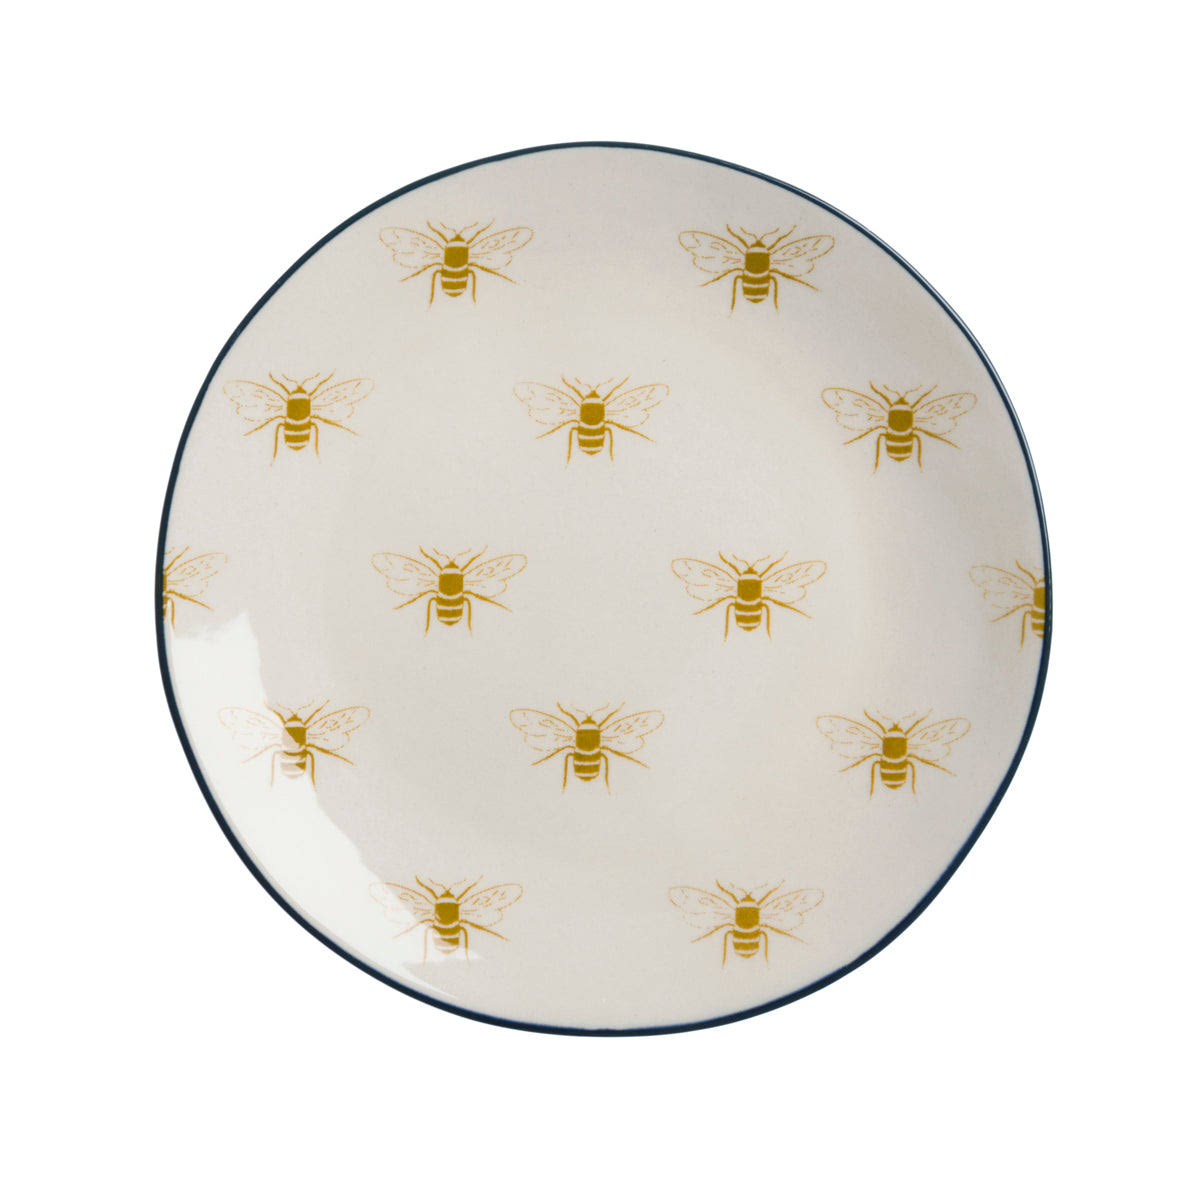 Bees Stoneware Nibbles Side Plate by Sophie Allport